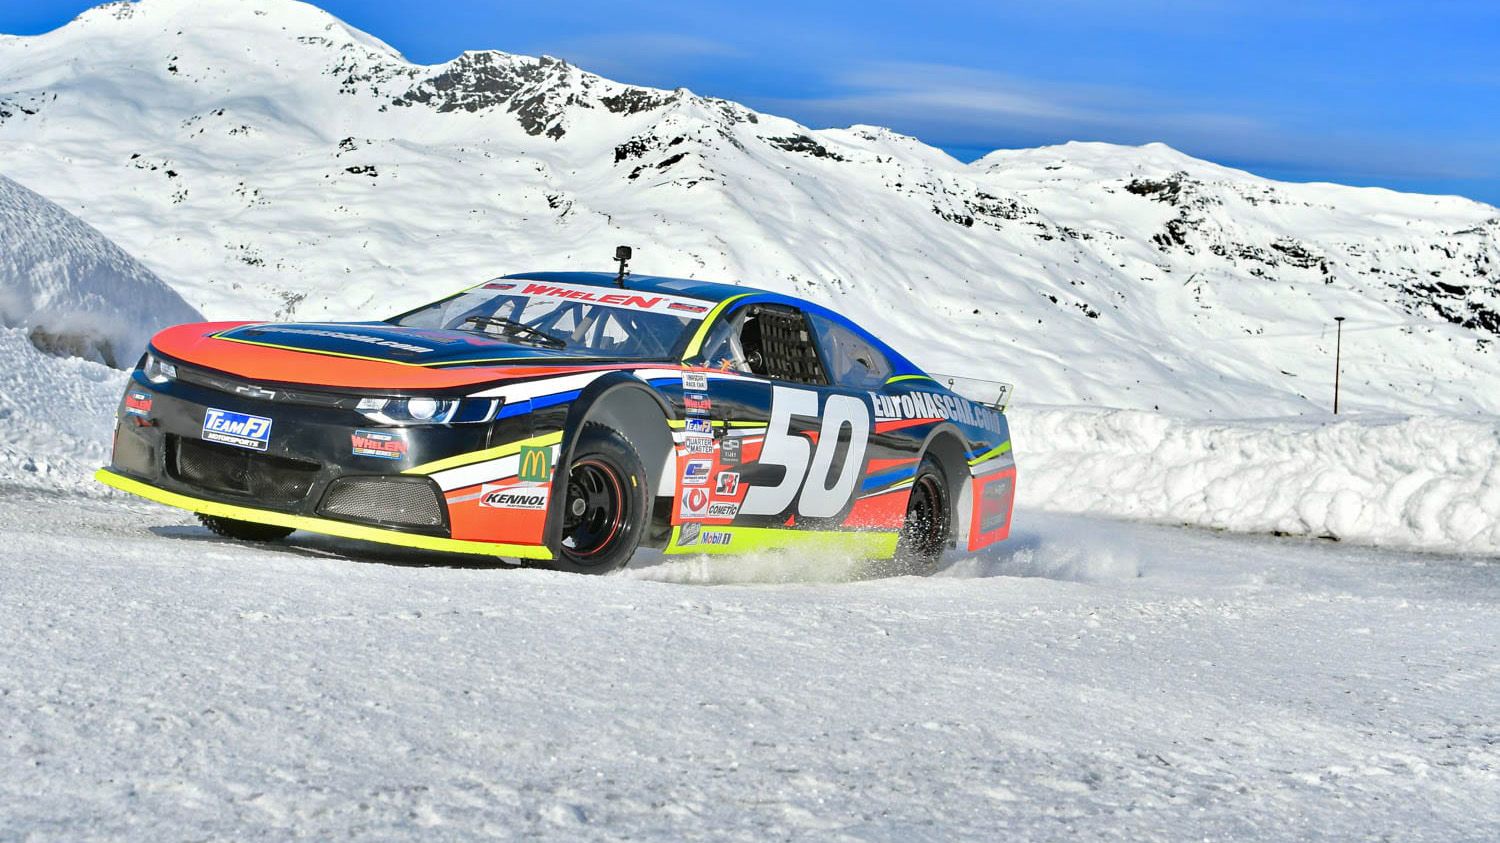 NASCAR announces bizarre new race meeting on a frozen lake for its Euro Series